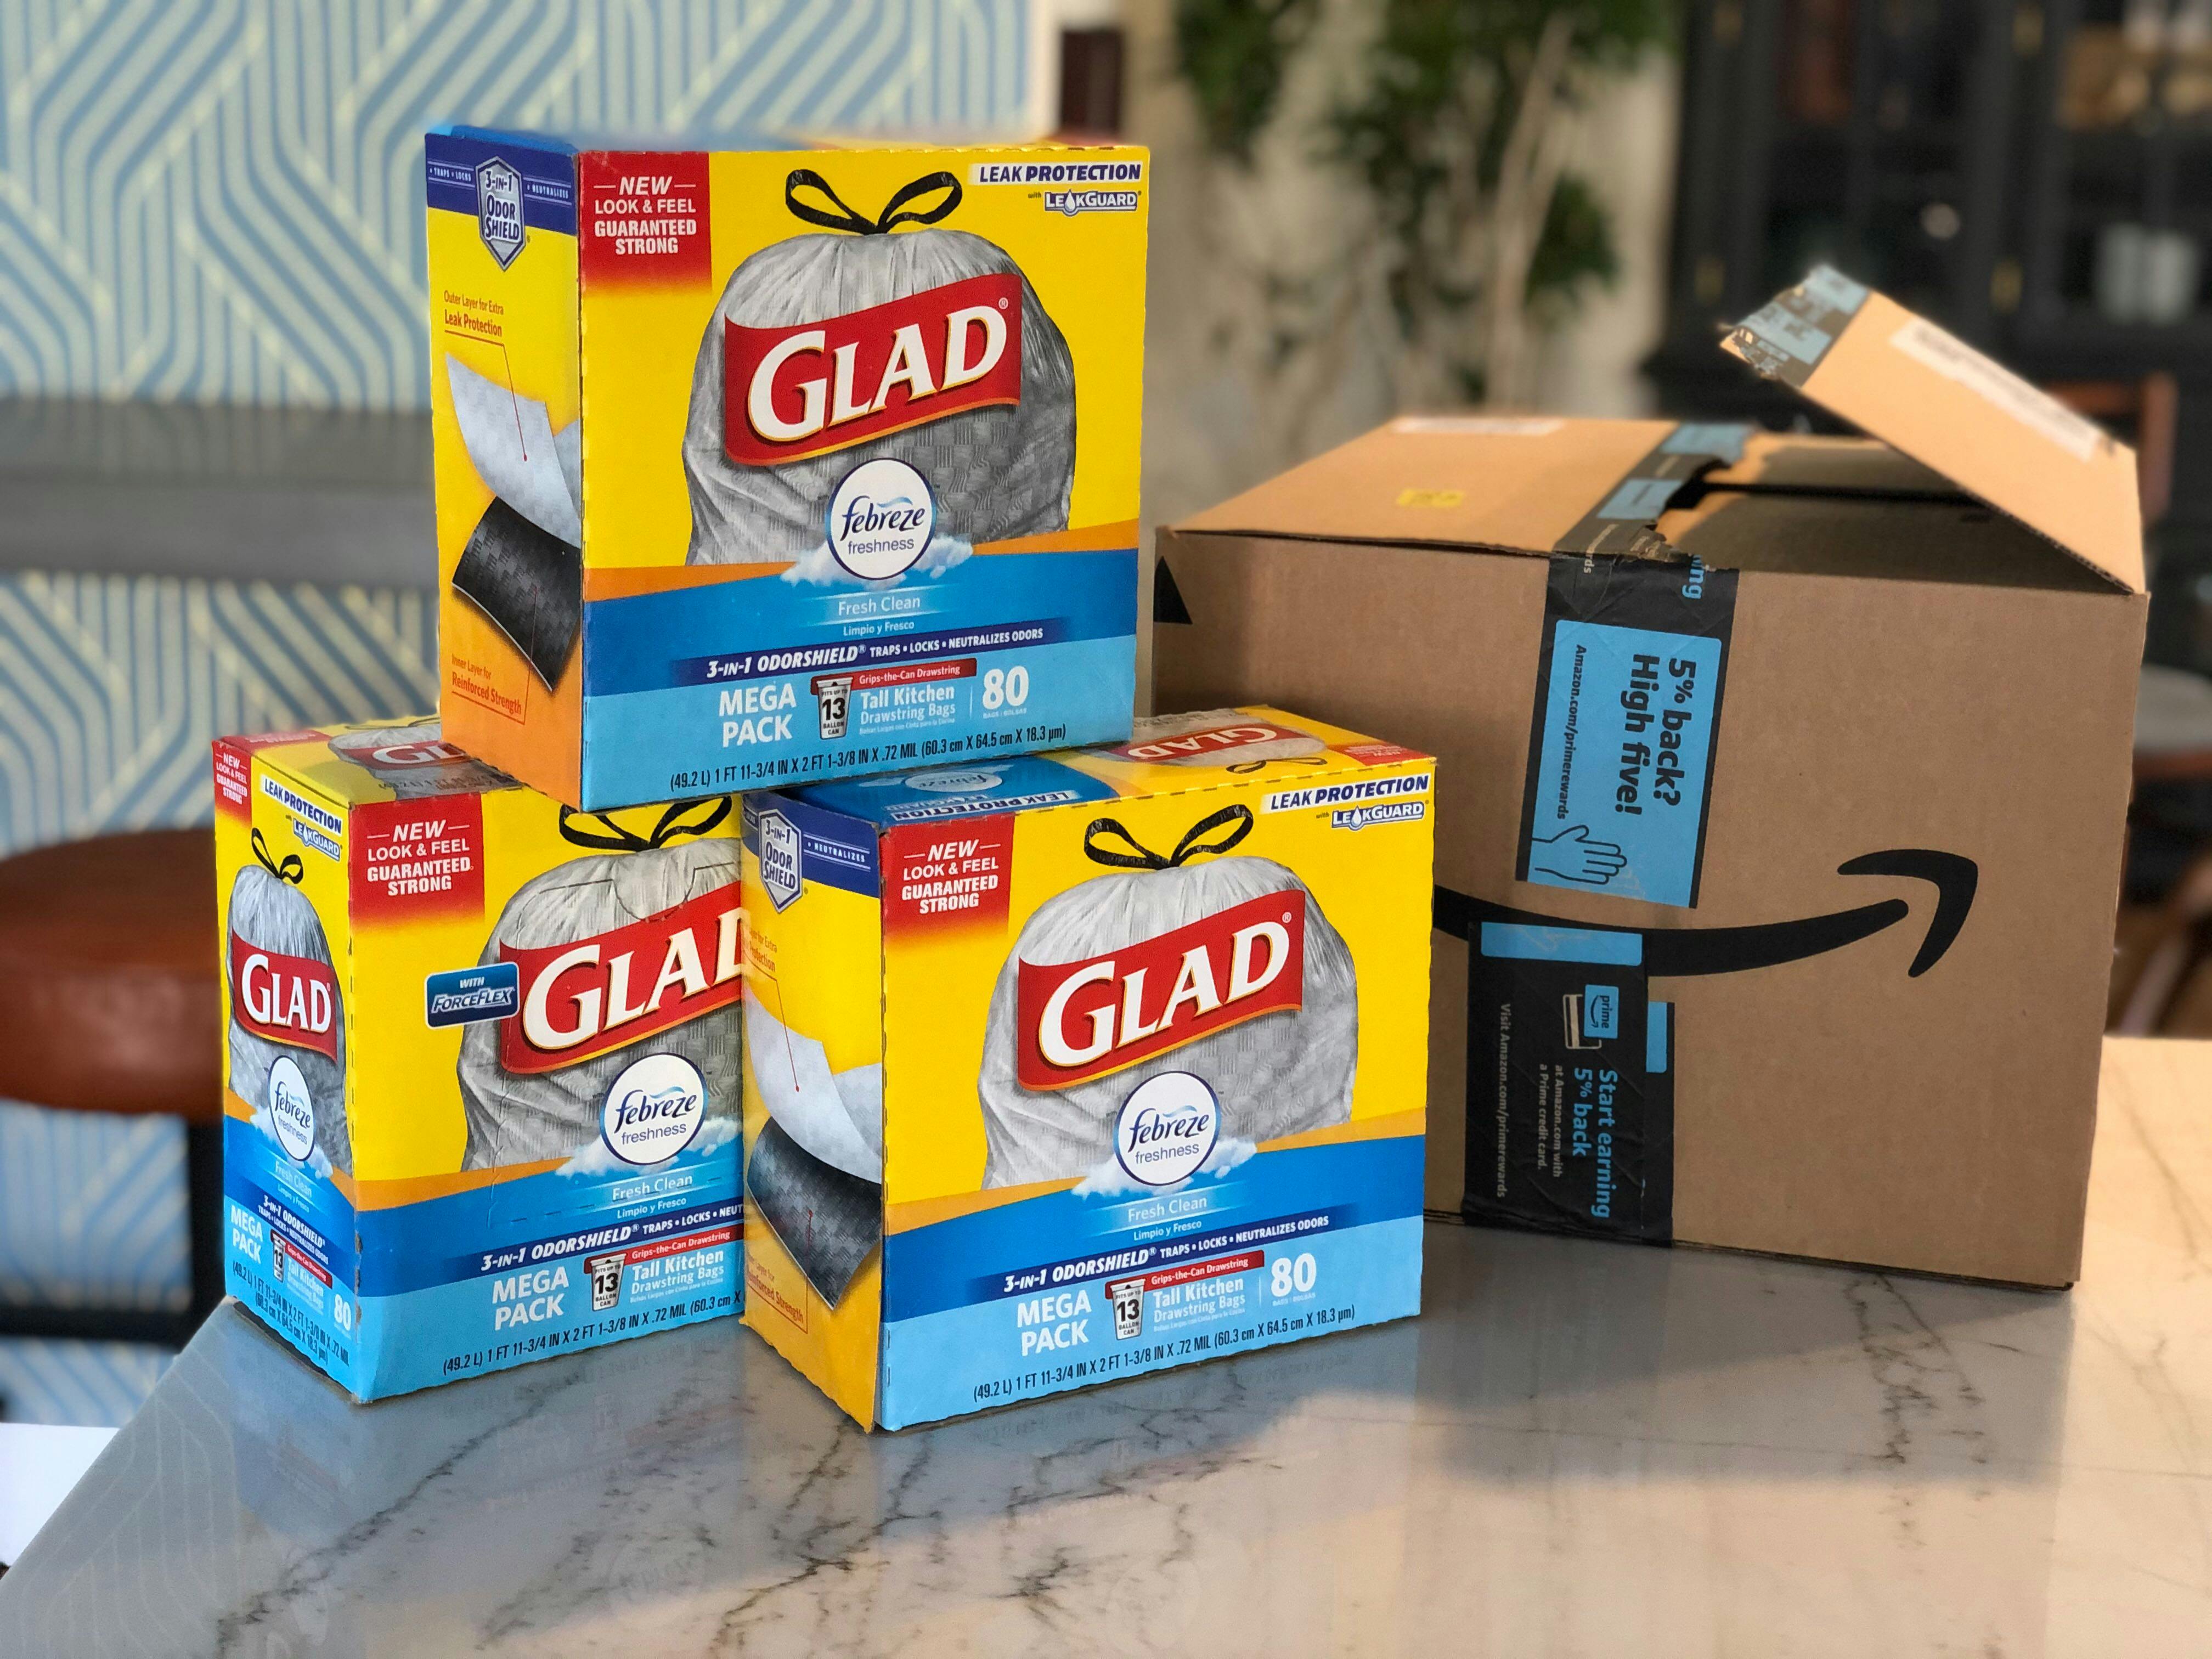 Three boxes of Glad trash bags stacked on a counter next to an Amazon box.